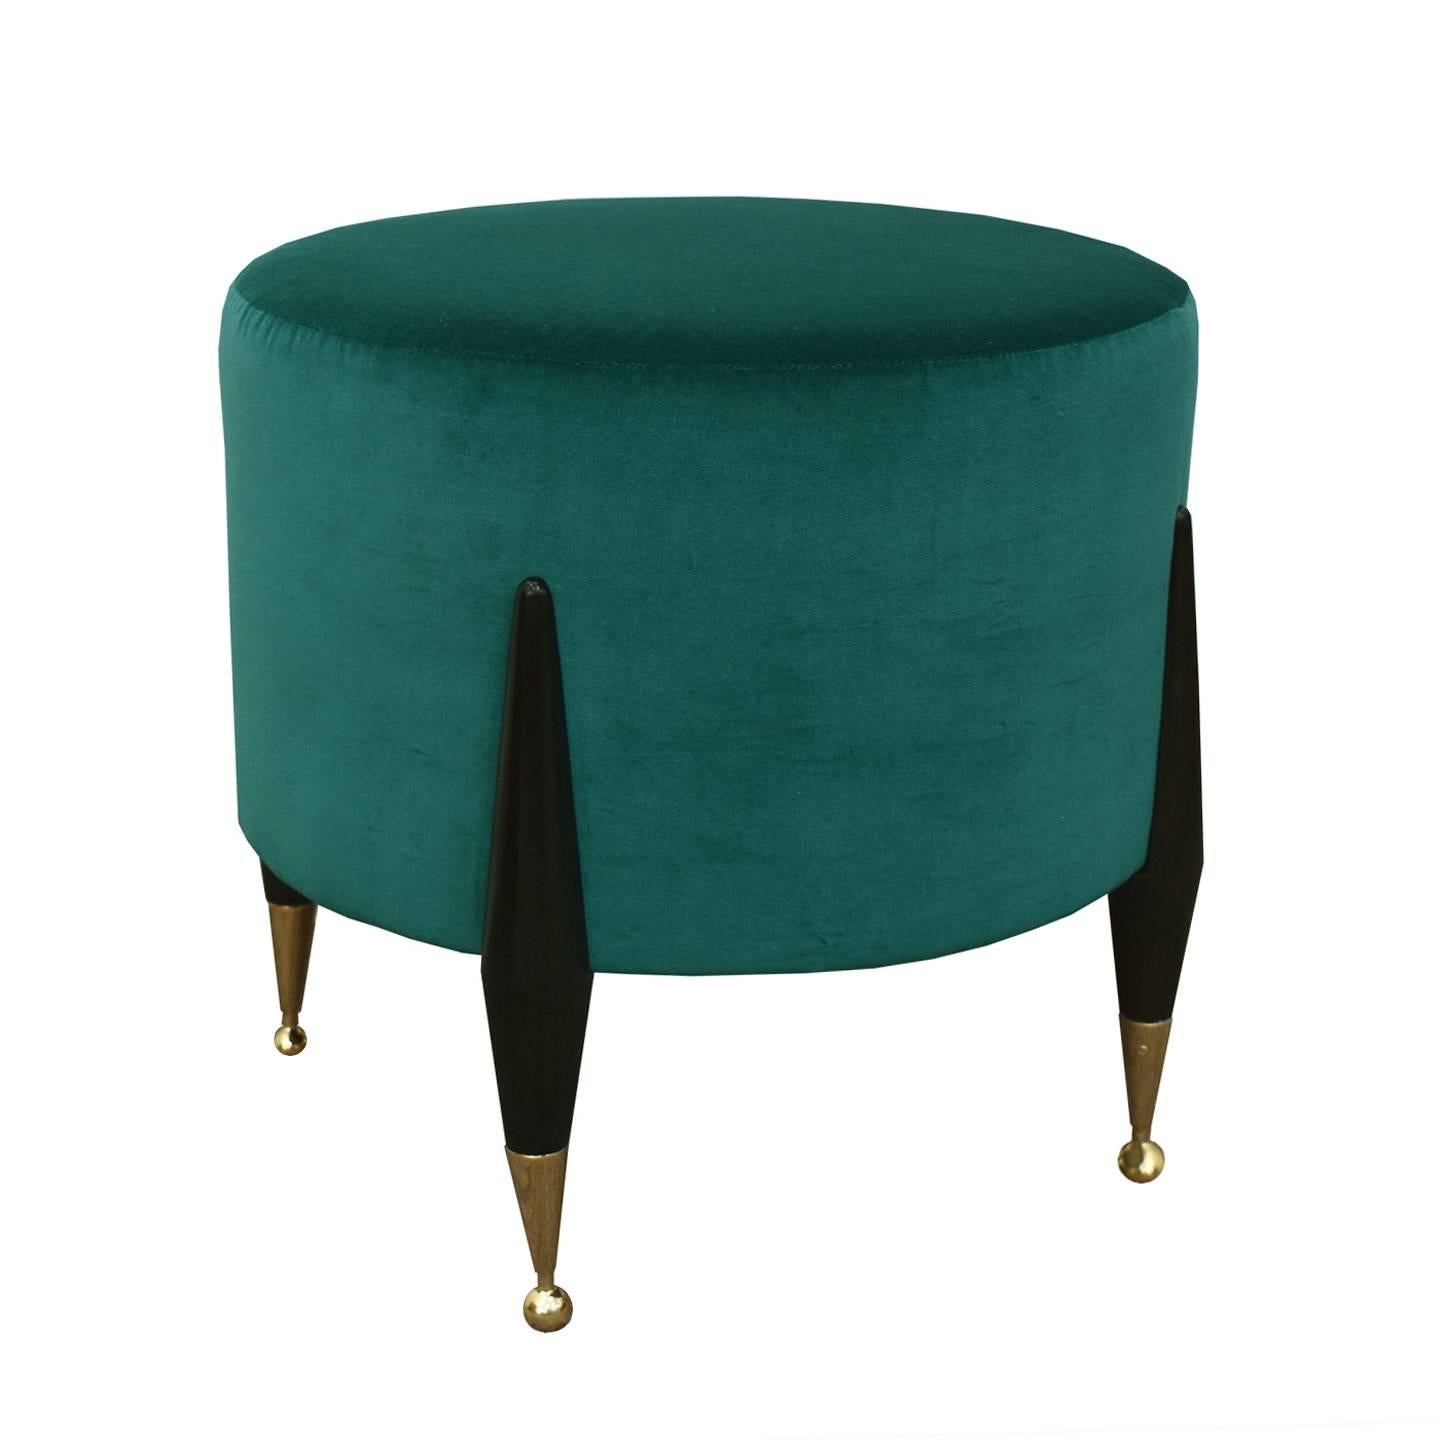 The mini imperial ball foot ottoman, designed by Irwin Feld Design for CF MODERN, is the smaller version of our full size imperial ball foot ottoman. The cylindrical cushion is upholstered in an exquisite teal velvet and stands out against the